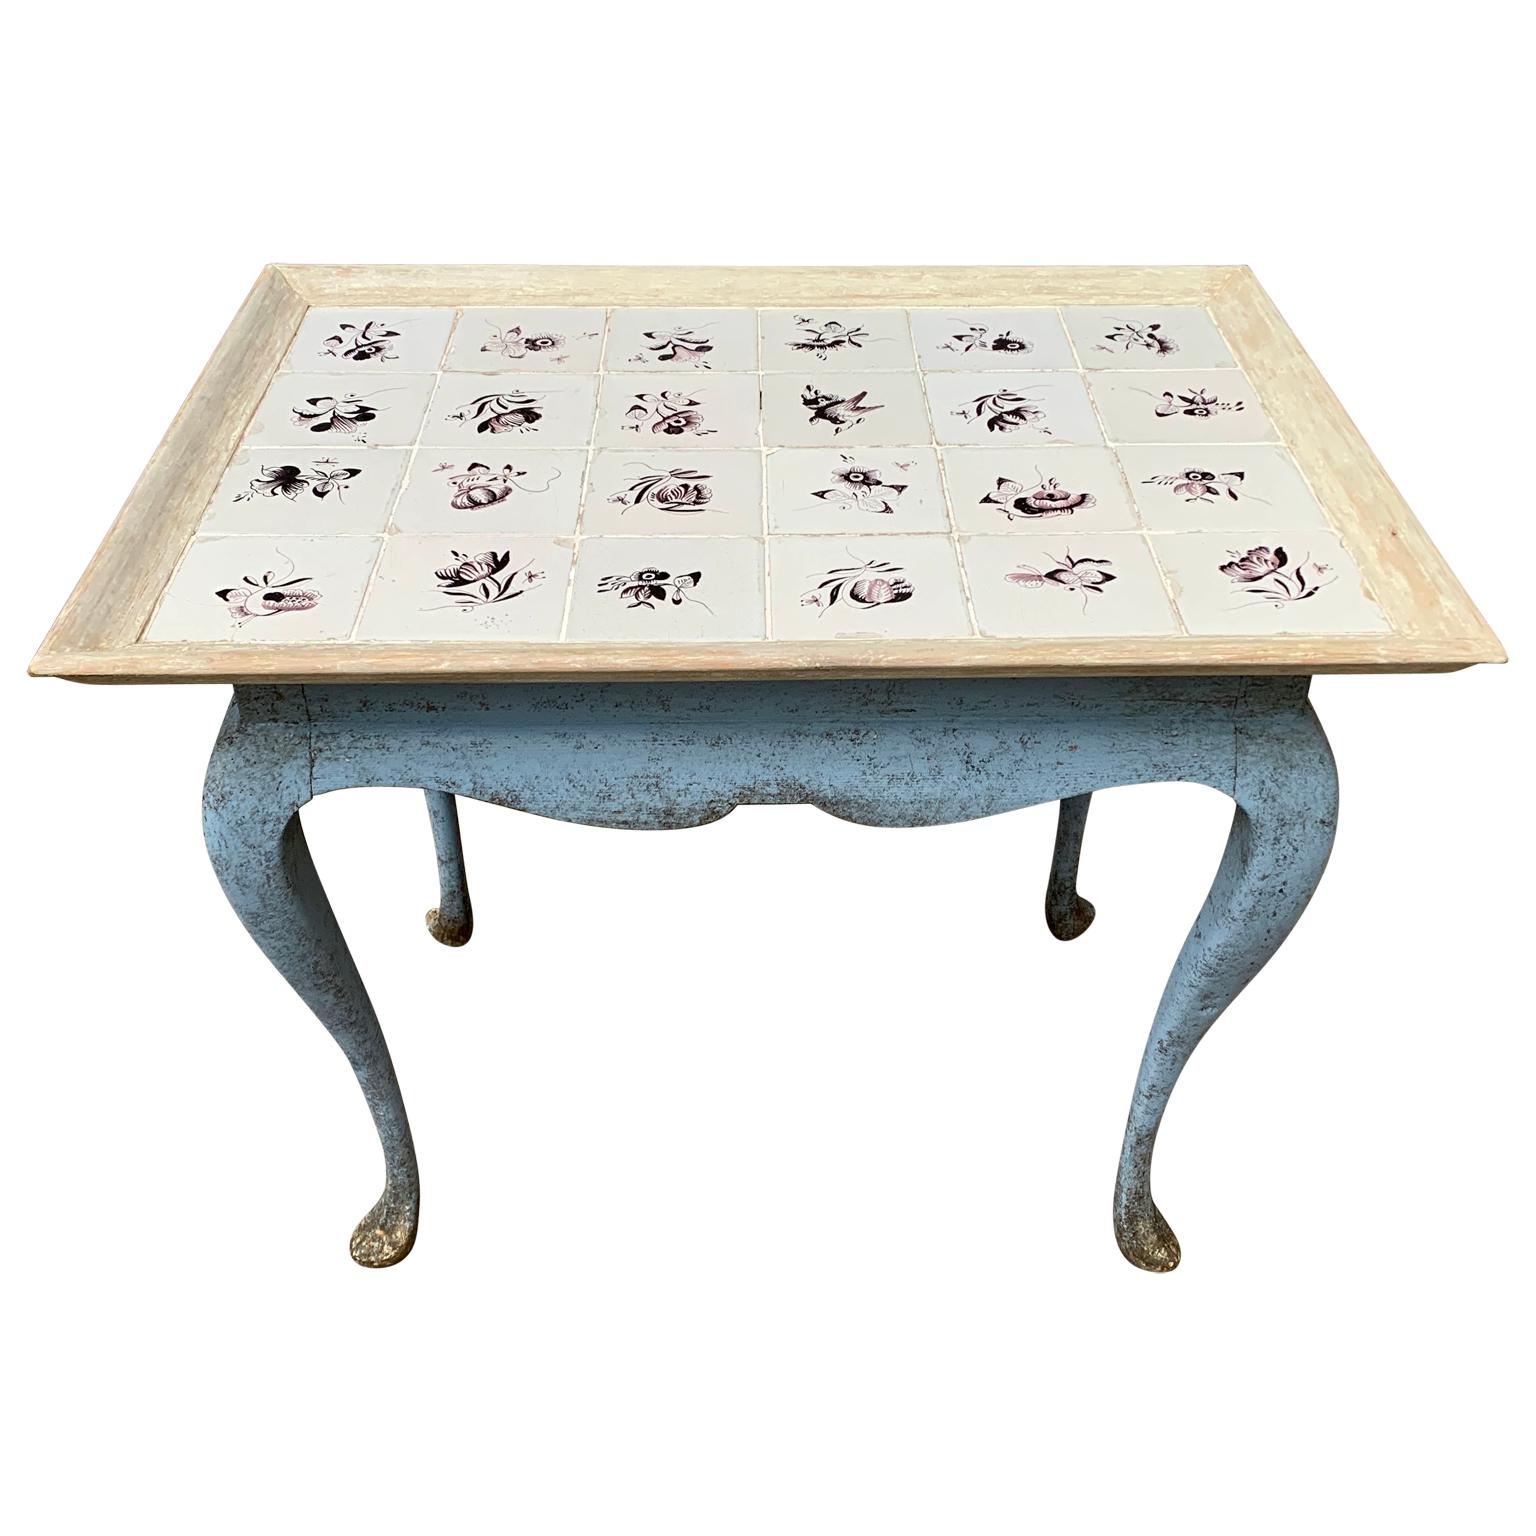 A Scandinavian Rococo blue painted pine console tile table with curved legs from end of 18th Century. The flower decorated tiles on the top are made in the Netherlands and are hand painted in manganese color. 
This table is in good sturdy and